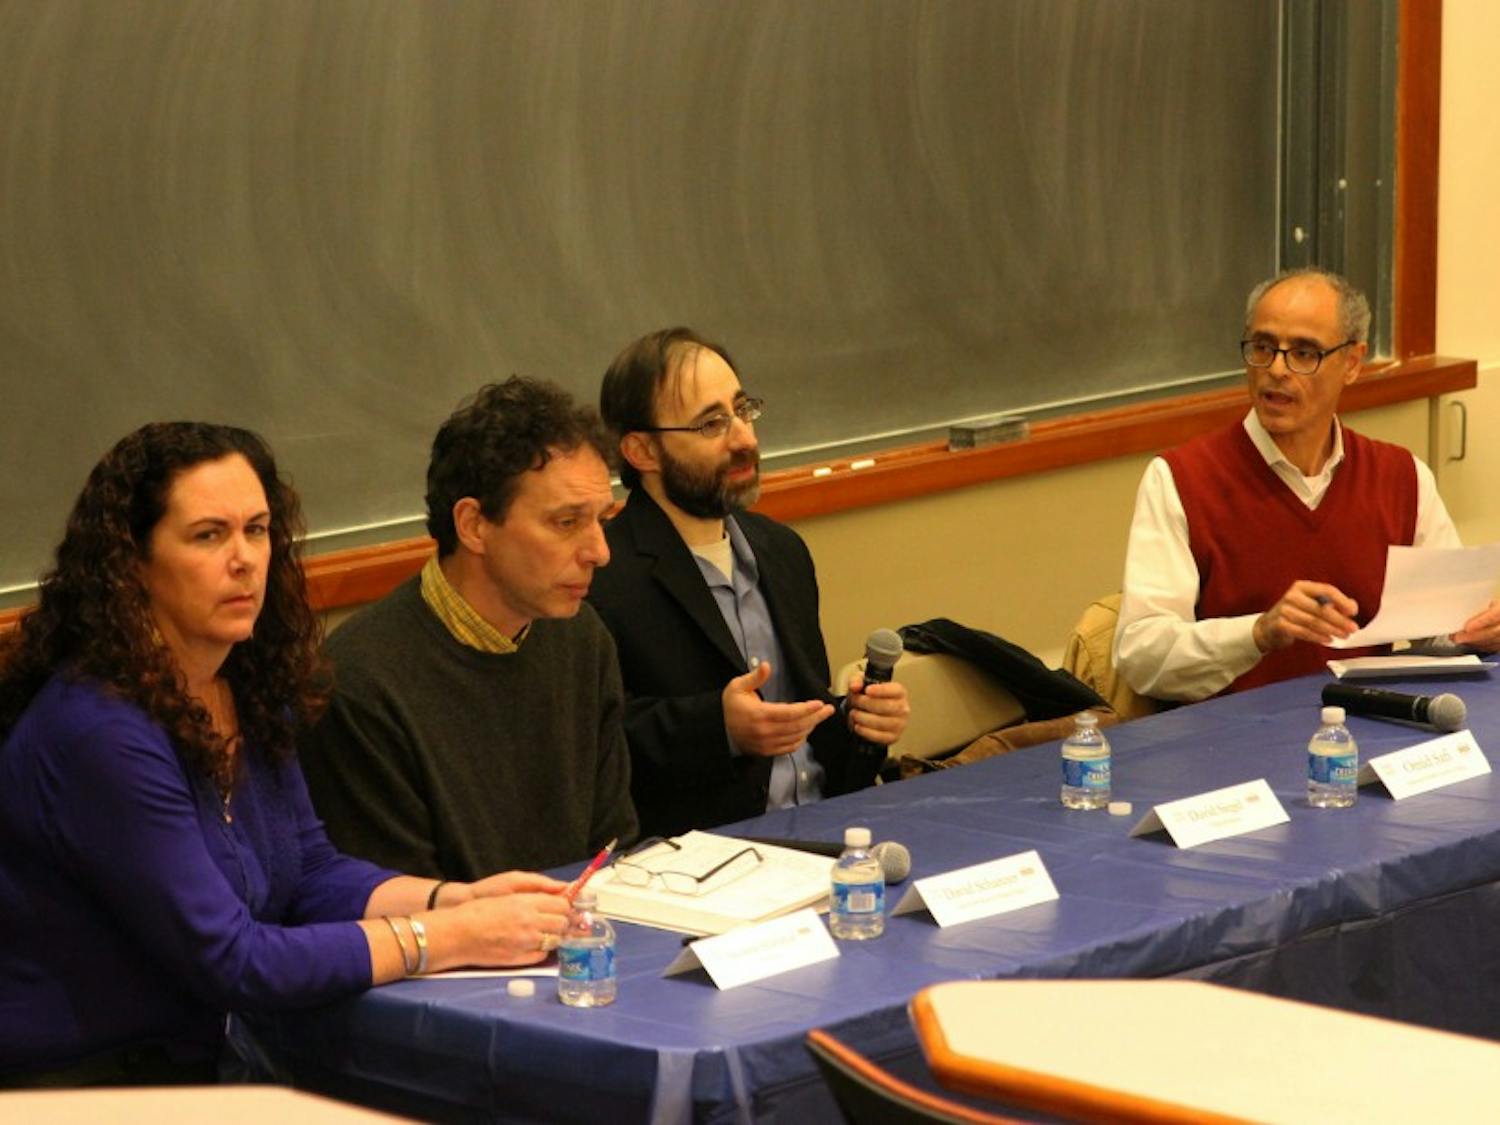 Wednesday's professor panel about the Islamic State group addressed the controversial topic of Islamophobia in the West.